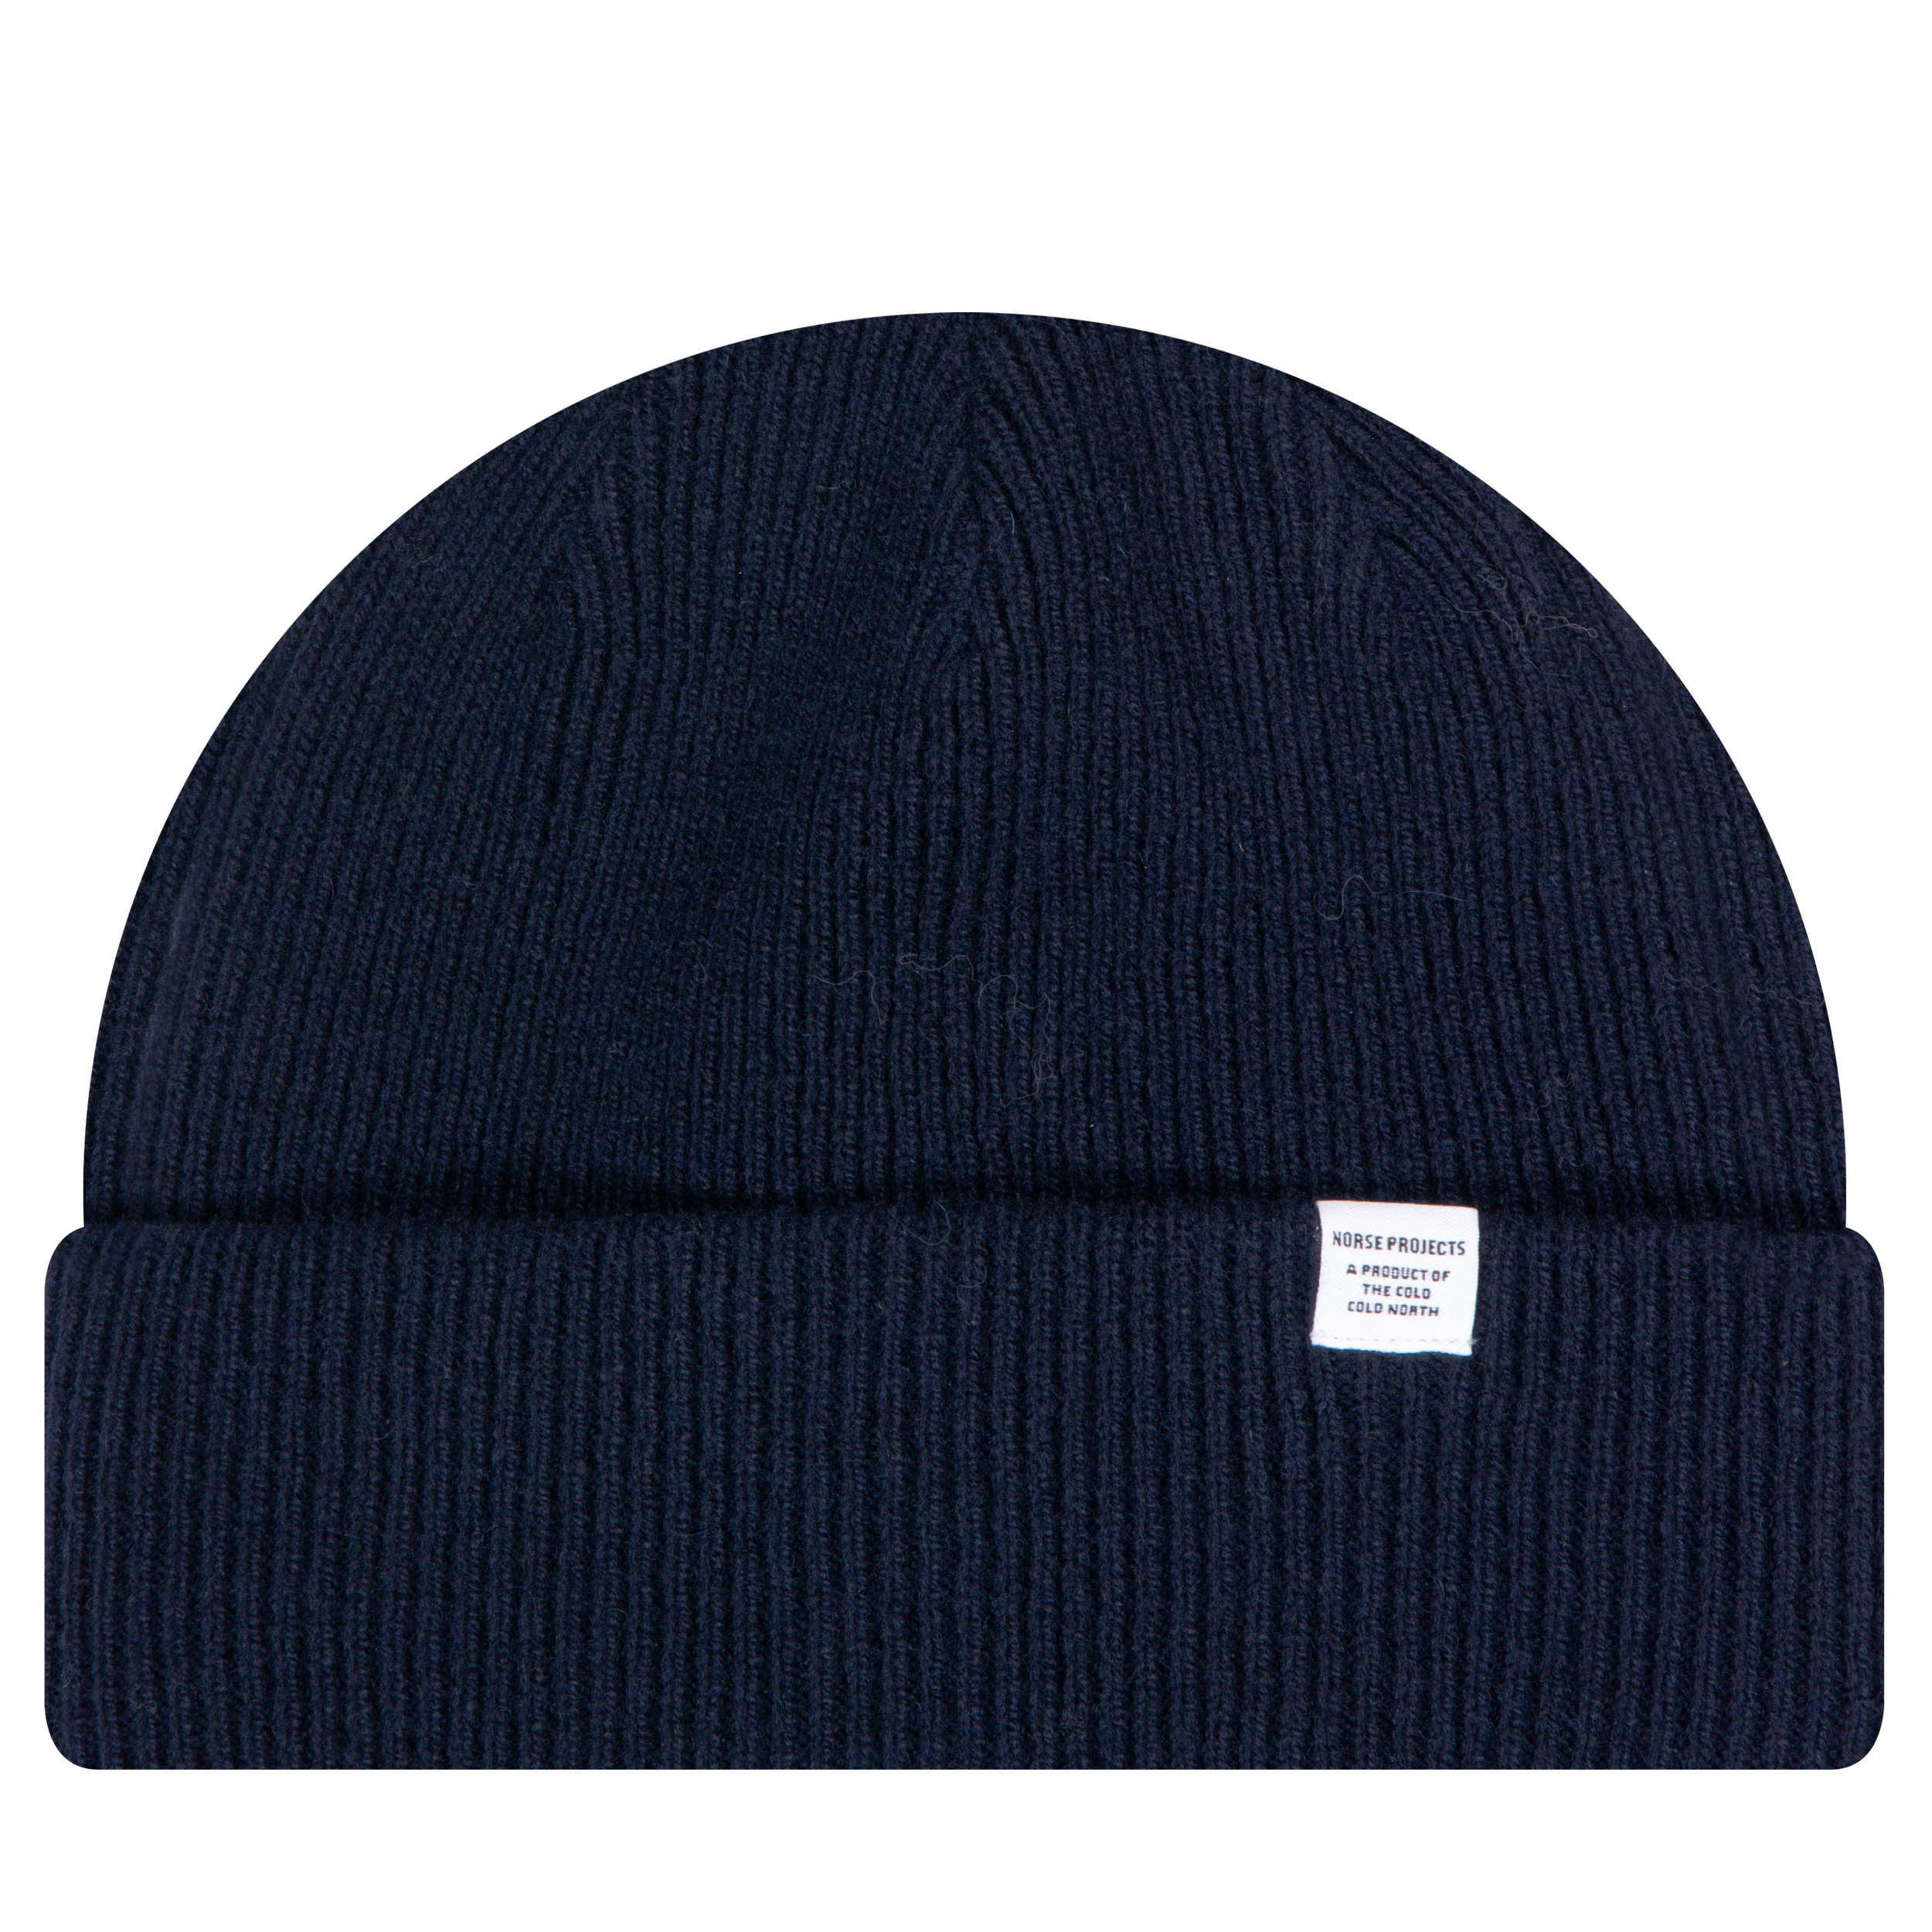 Norse Projects ’Knitted’ Beanie Dark Navy